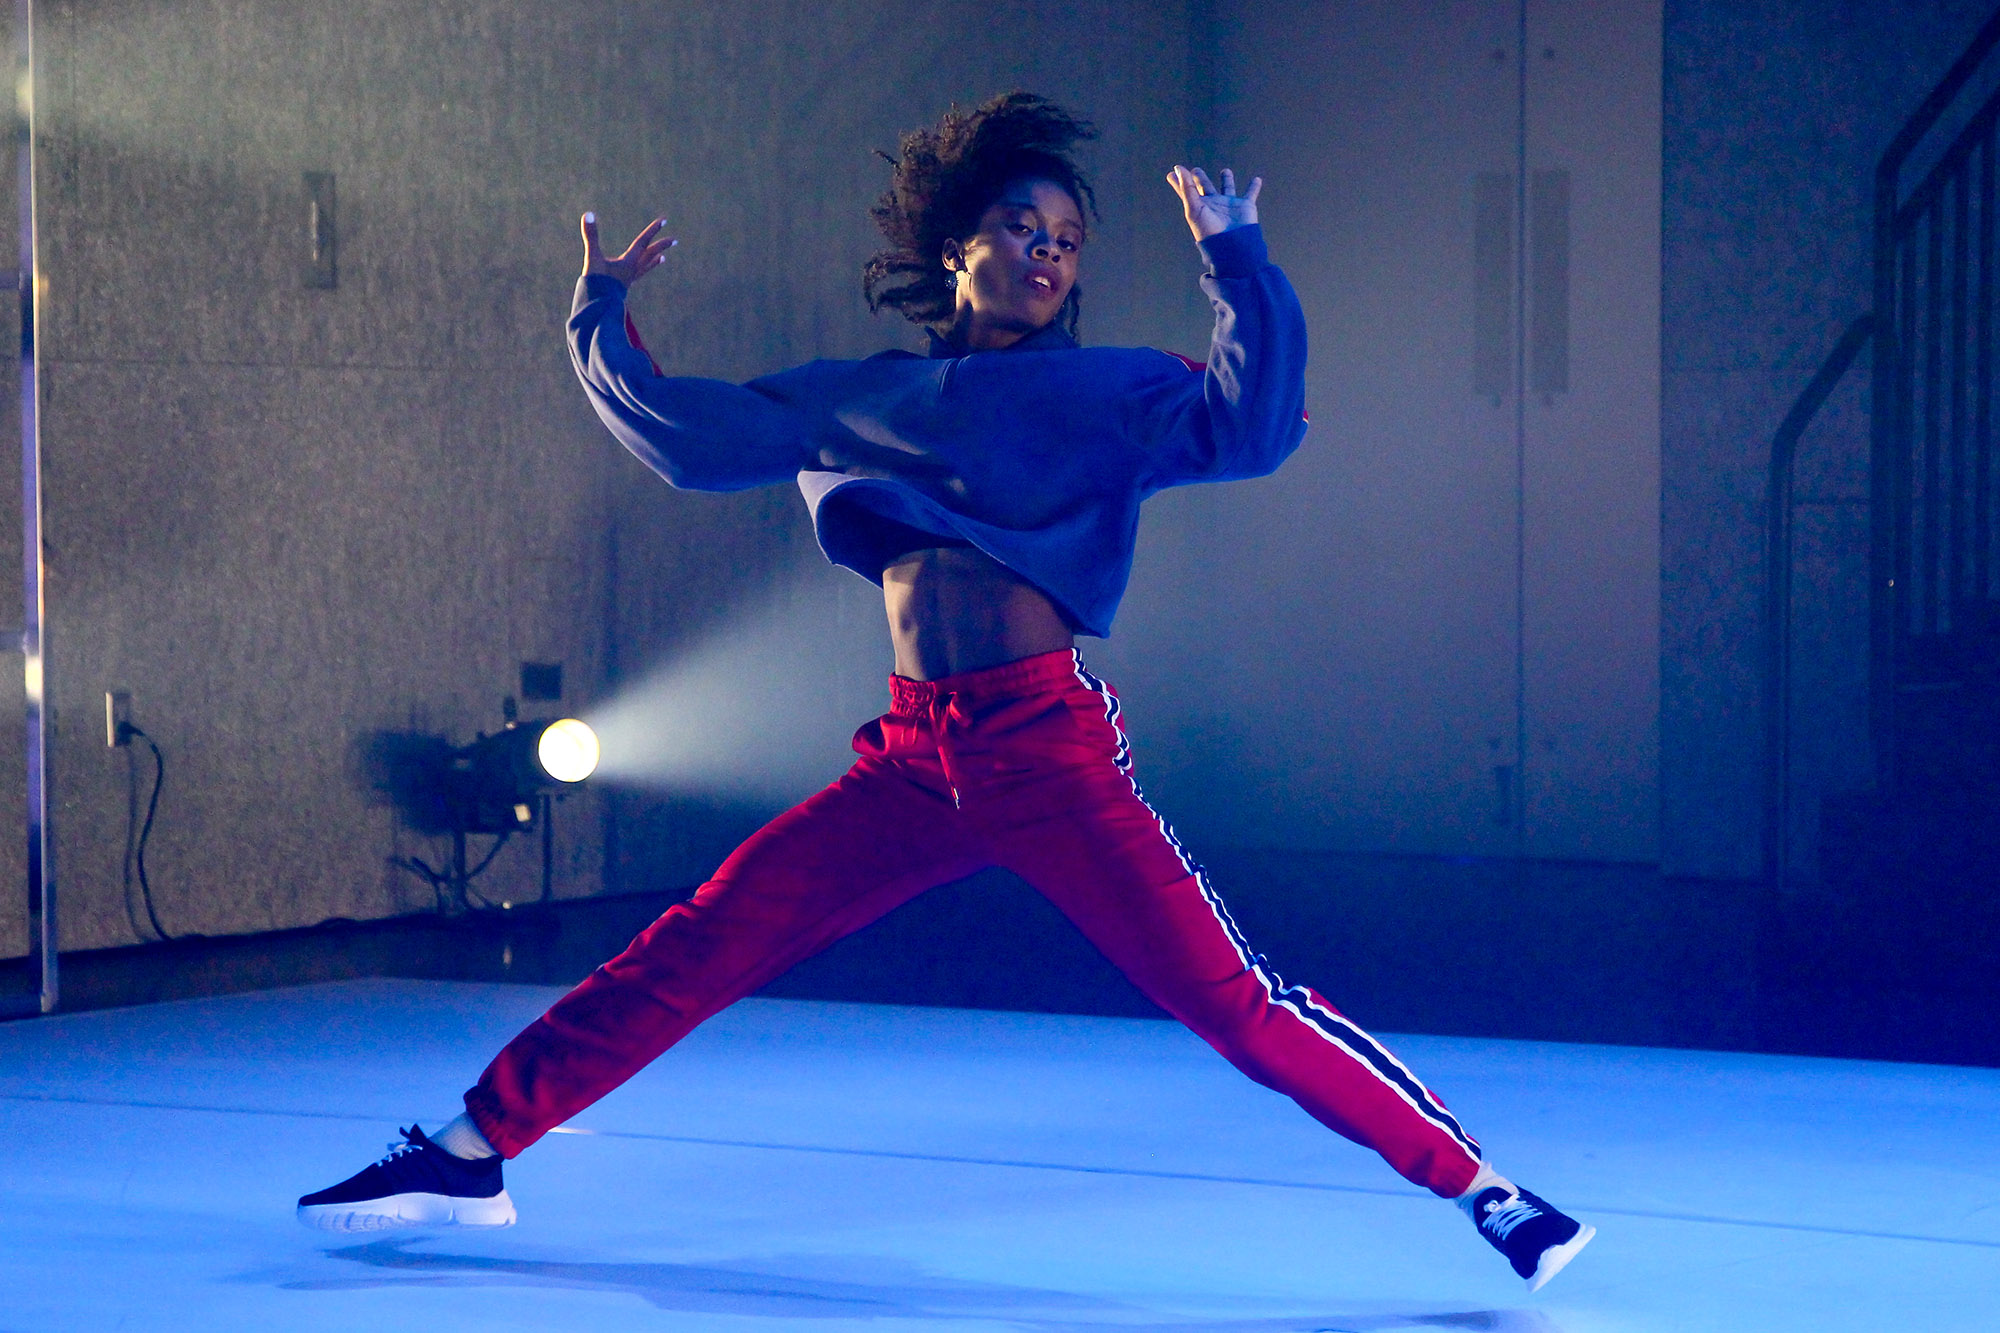 Runako Campbell lunges in mid-air with legs and arms spread wide. She wears red sweats and a navy blue hoodie.